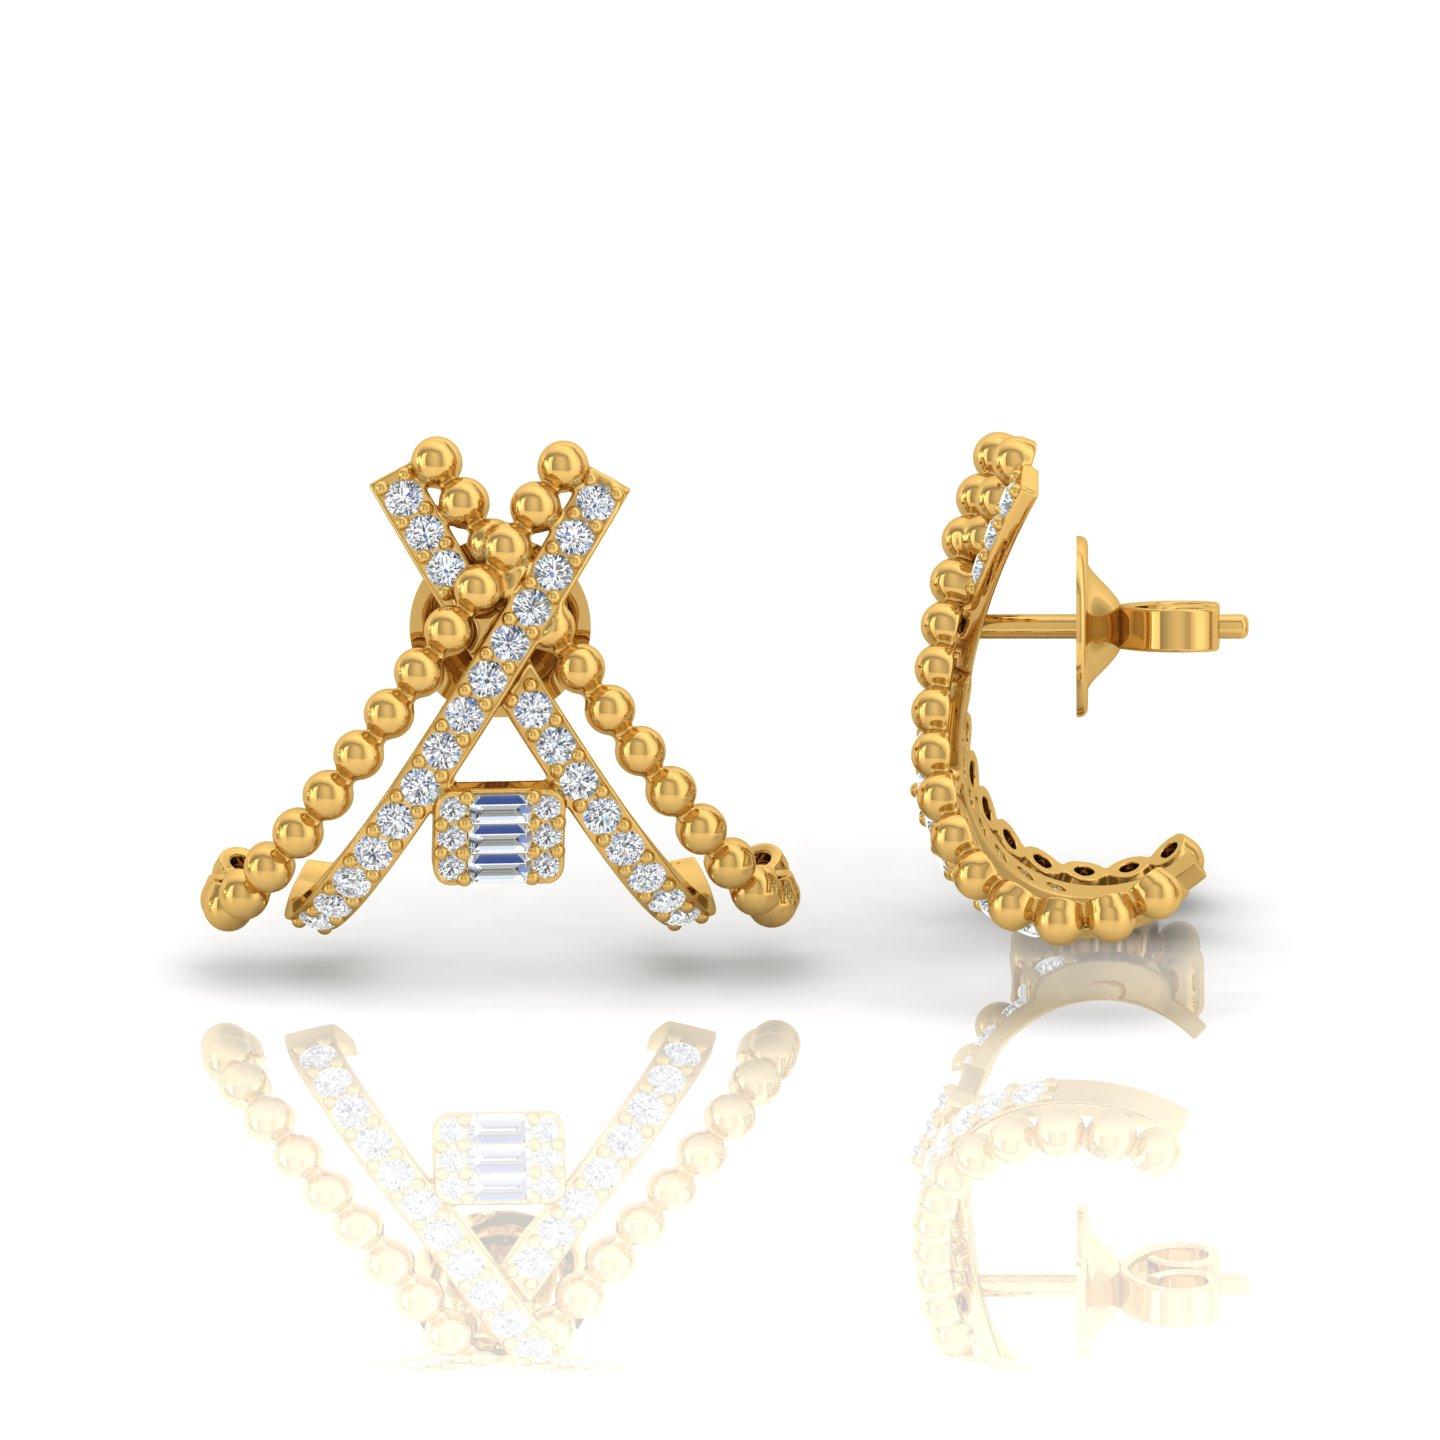 Item Code :-  q
Gross Wt. :- 6.98 gm
18k Solid Yellow Gold Wt. :- 6.79 gm
Natural Diamond Wt. :- 0.96 Ct. ( AVERAGE DIAMOND CLARITY SI1-SI2 & COLOR H-I )
Earrings Size :- 20 x 24 mm approx.

✦ Sizing
.....................
We can adjust most items to